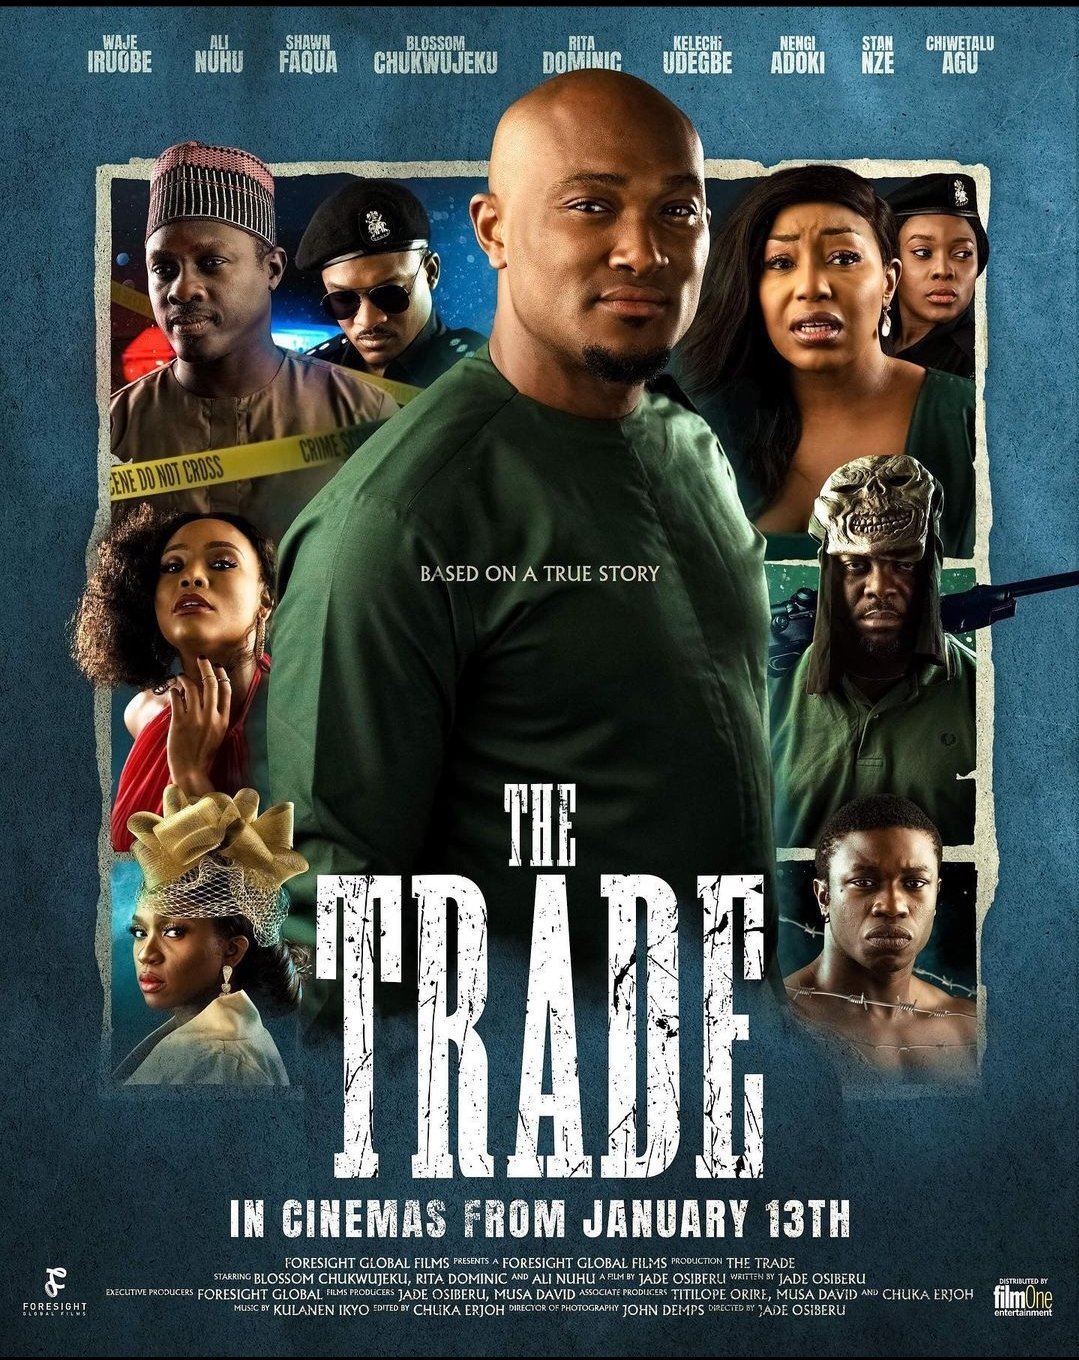 Nigerian trade - "The Trade" Sells Underwhelming N15 Million After 3 Weeks Box Office Run